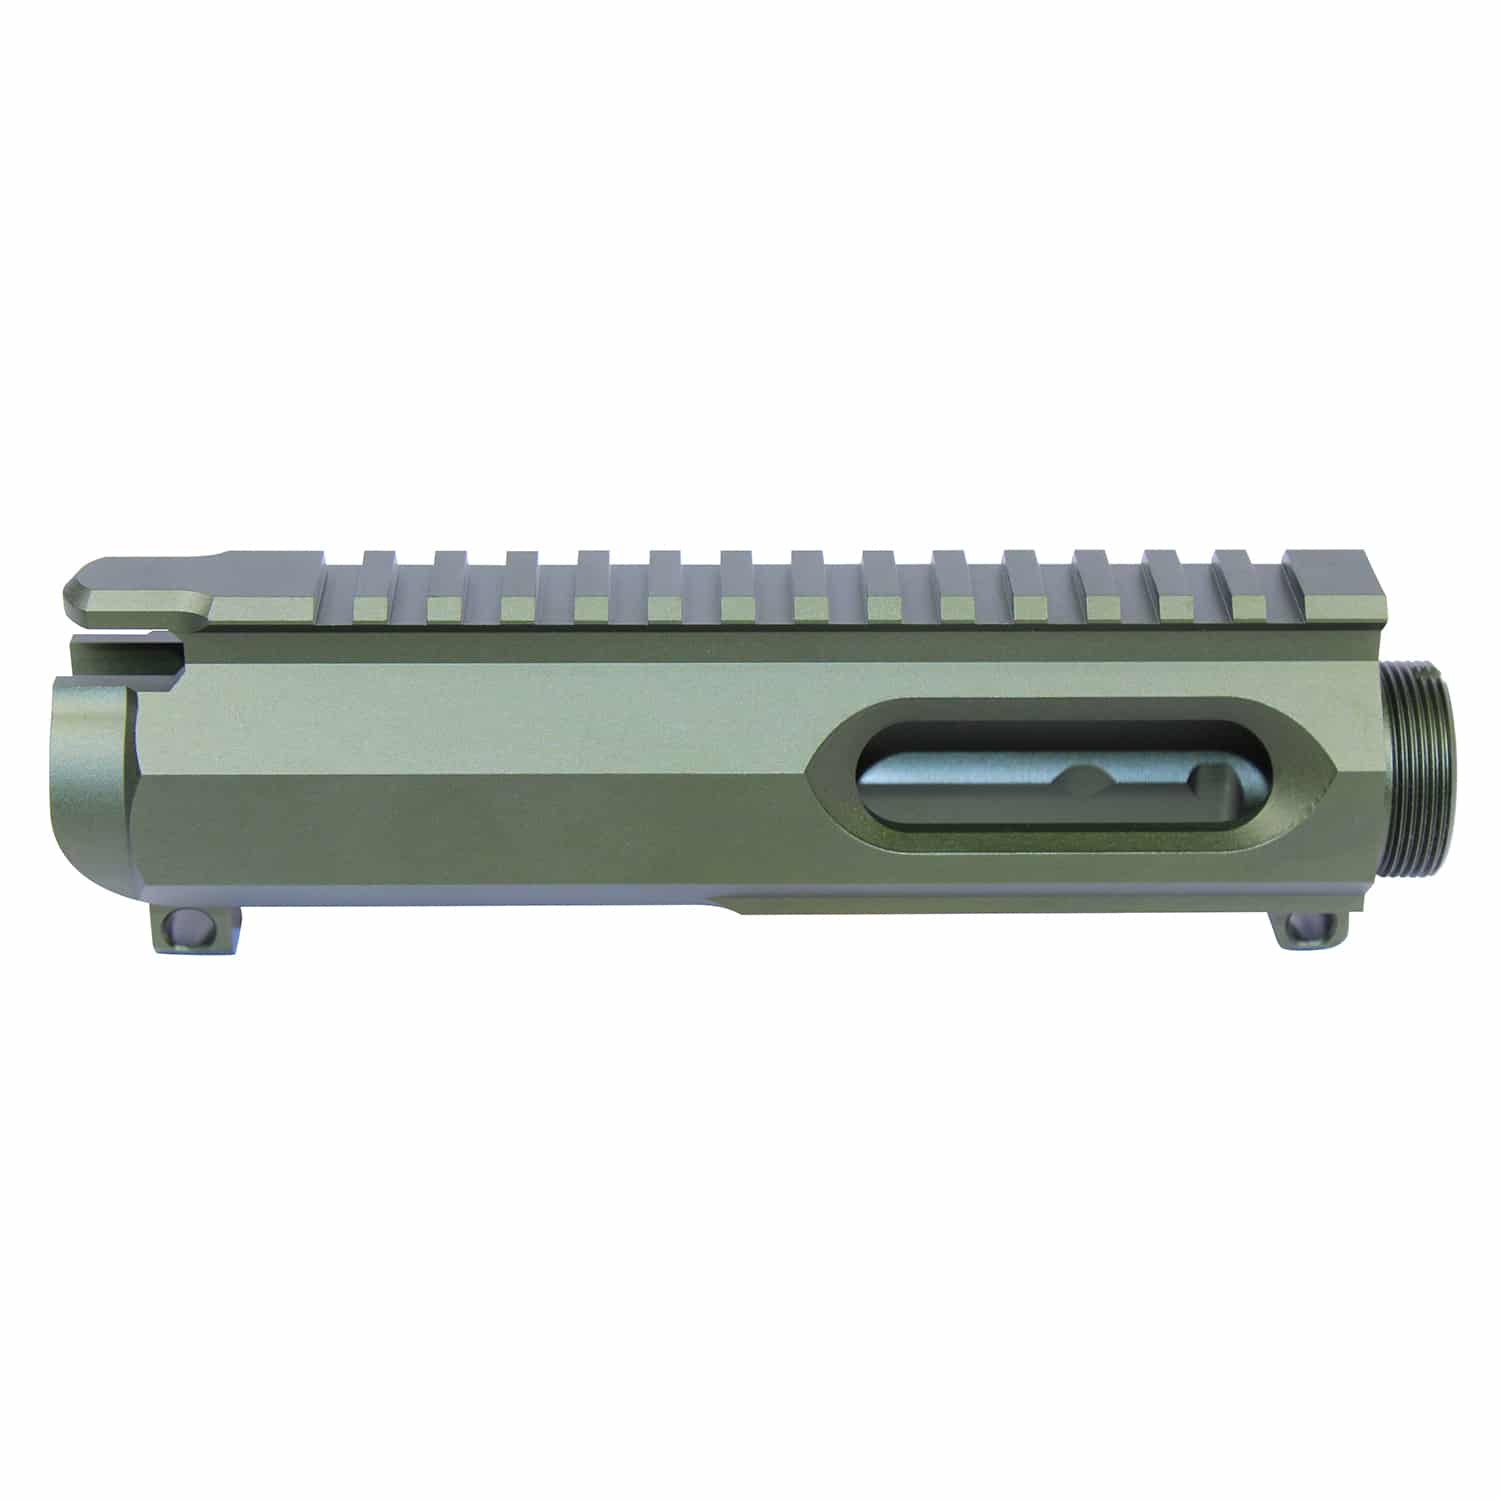 AR-15 9mm stripped billet upper receiver with a matte anodized green finish.